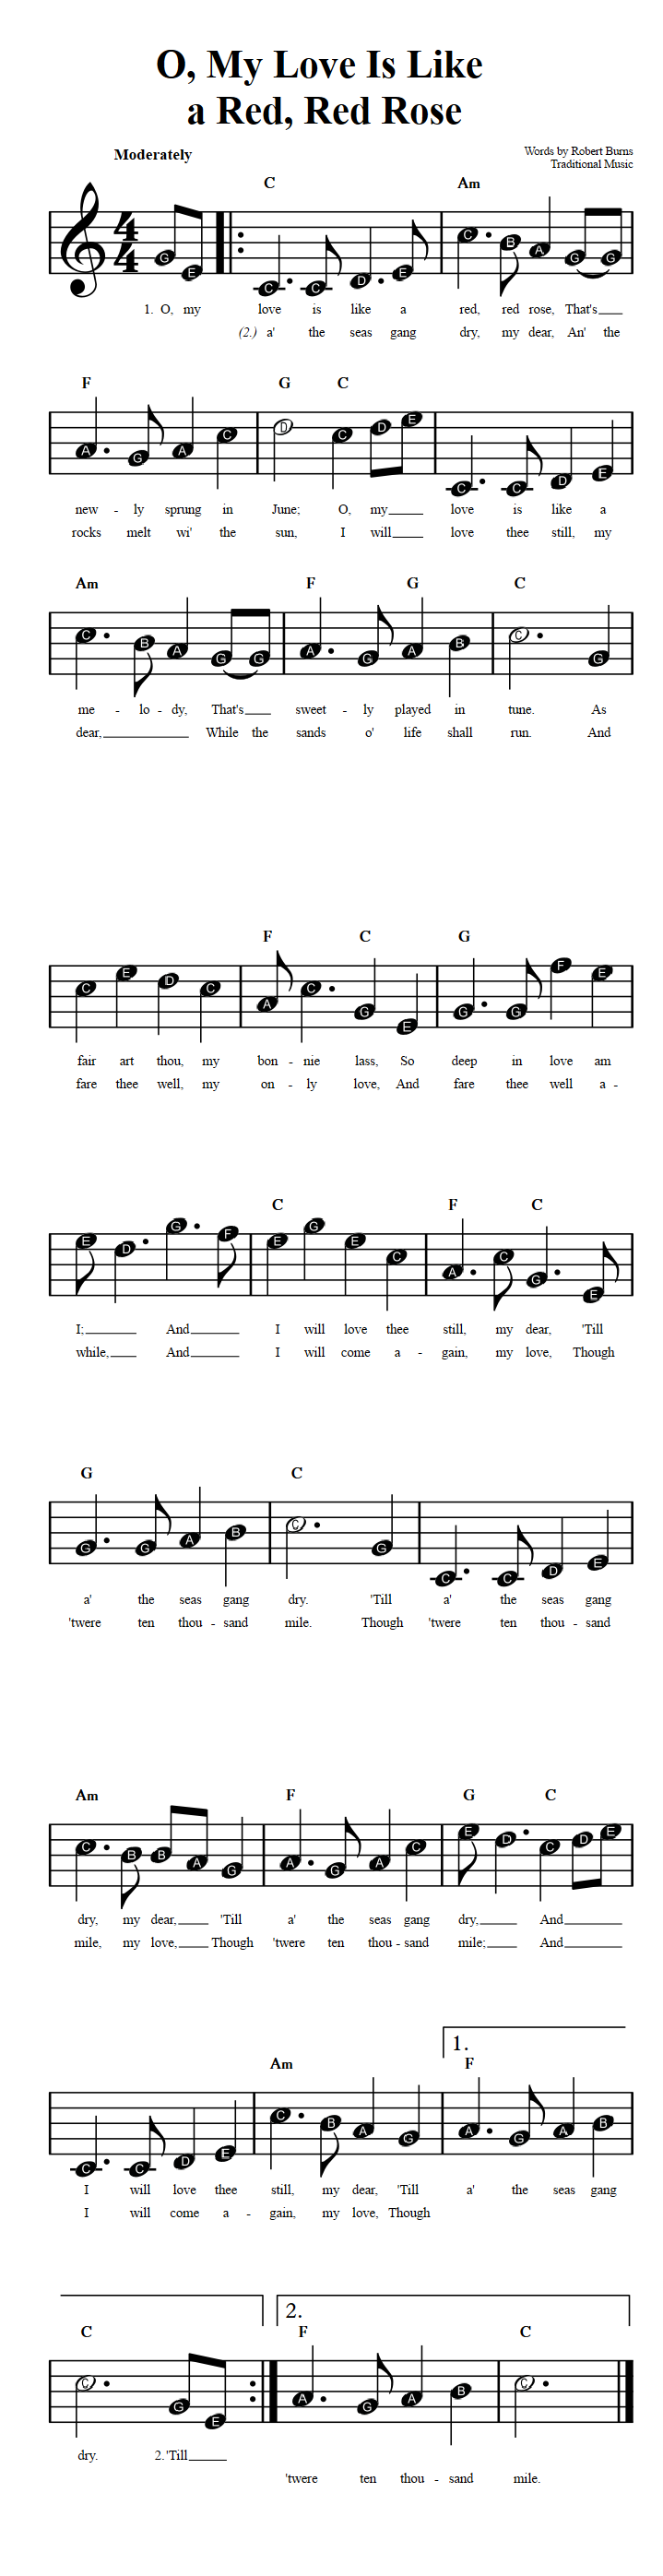 O, My Love Is Like a Red, Red Rose  Beginner Sheet Music